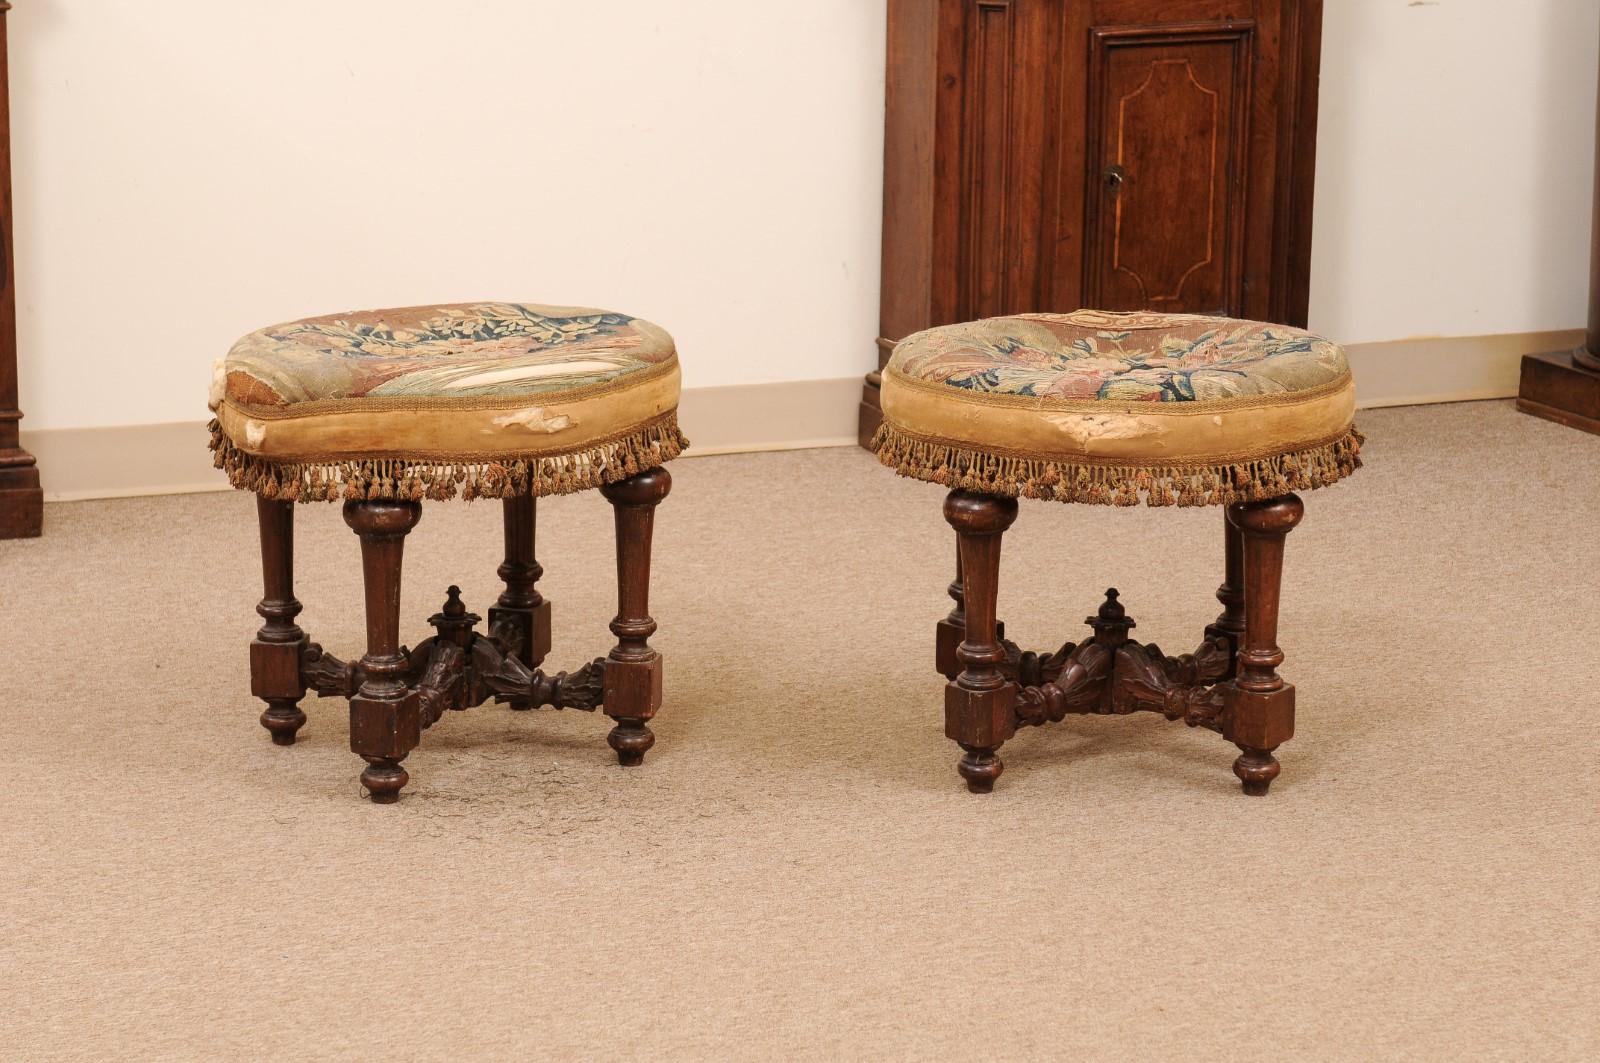 Pair of Oval 18th Century Italian Walnut Benches with Turned Legs  In Good Condition For Sale In Atlanta, GA